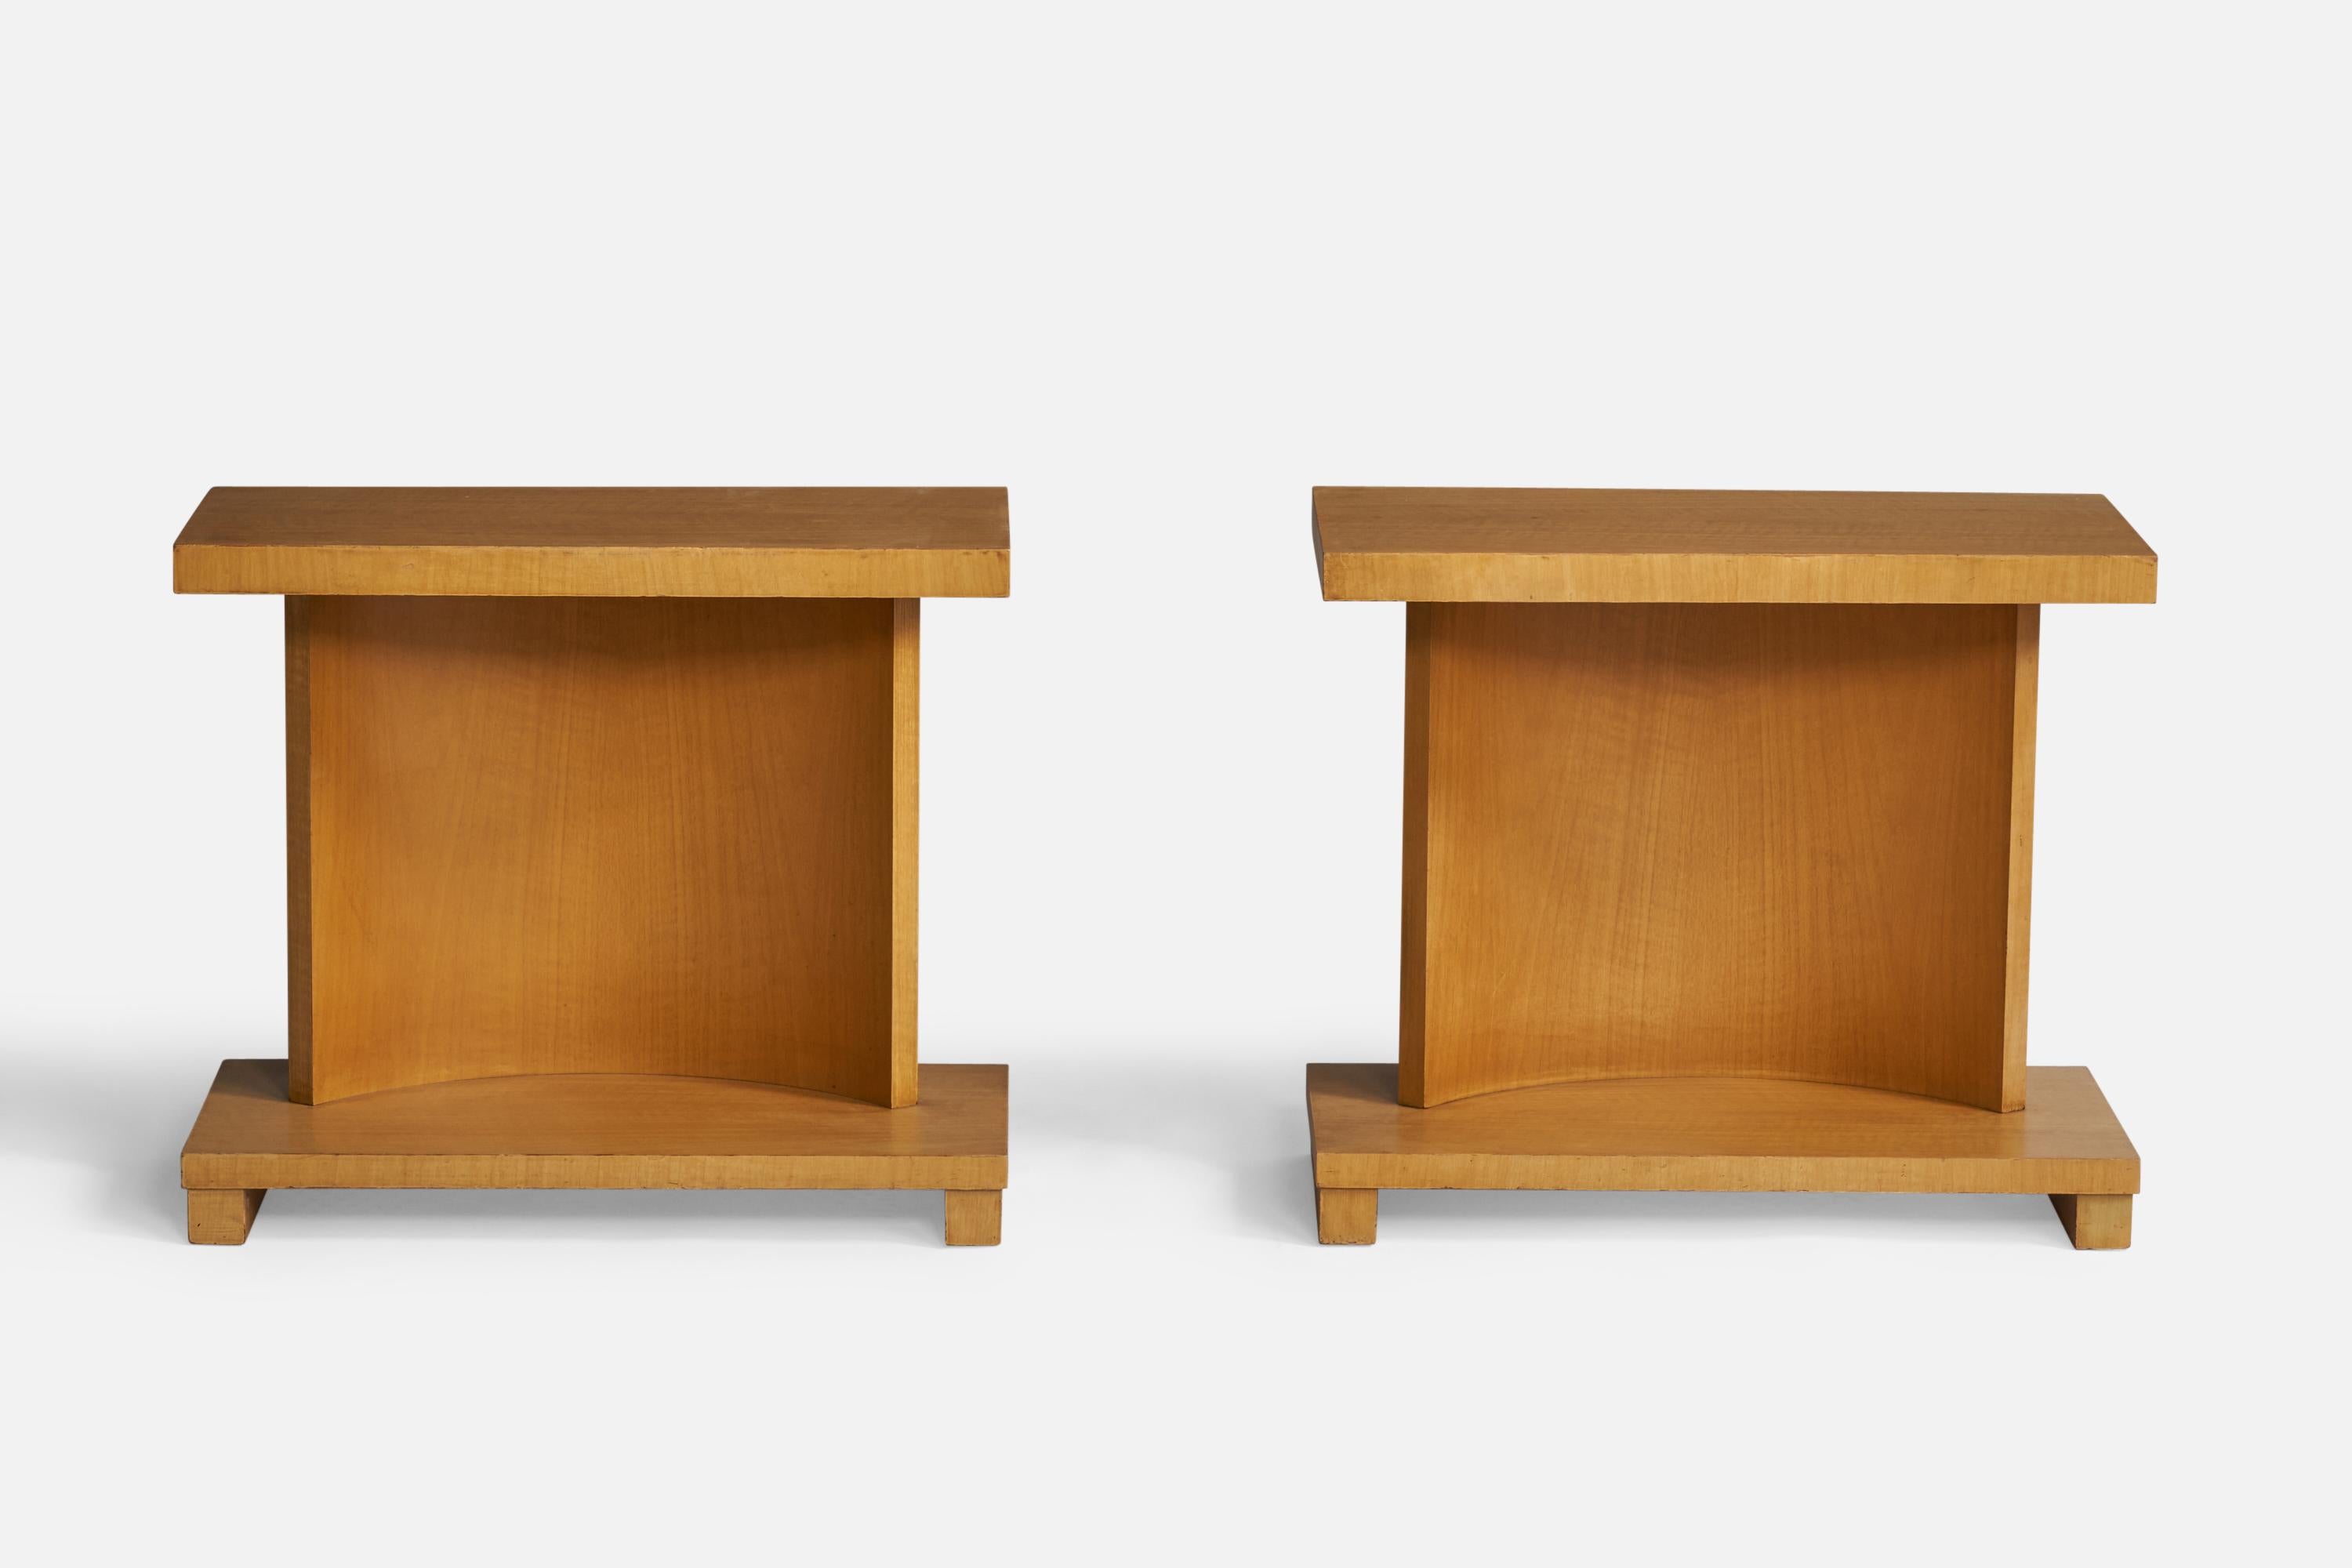 A pair of birch-veneered wood side tables or night stands designed and produced in the US, 1940s.